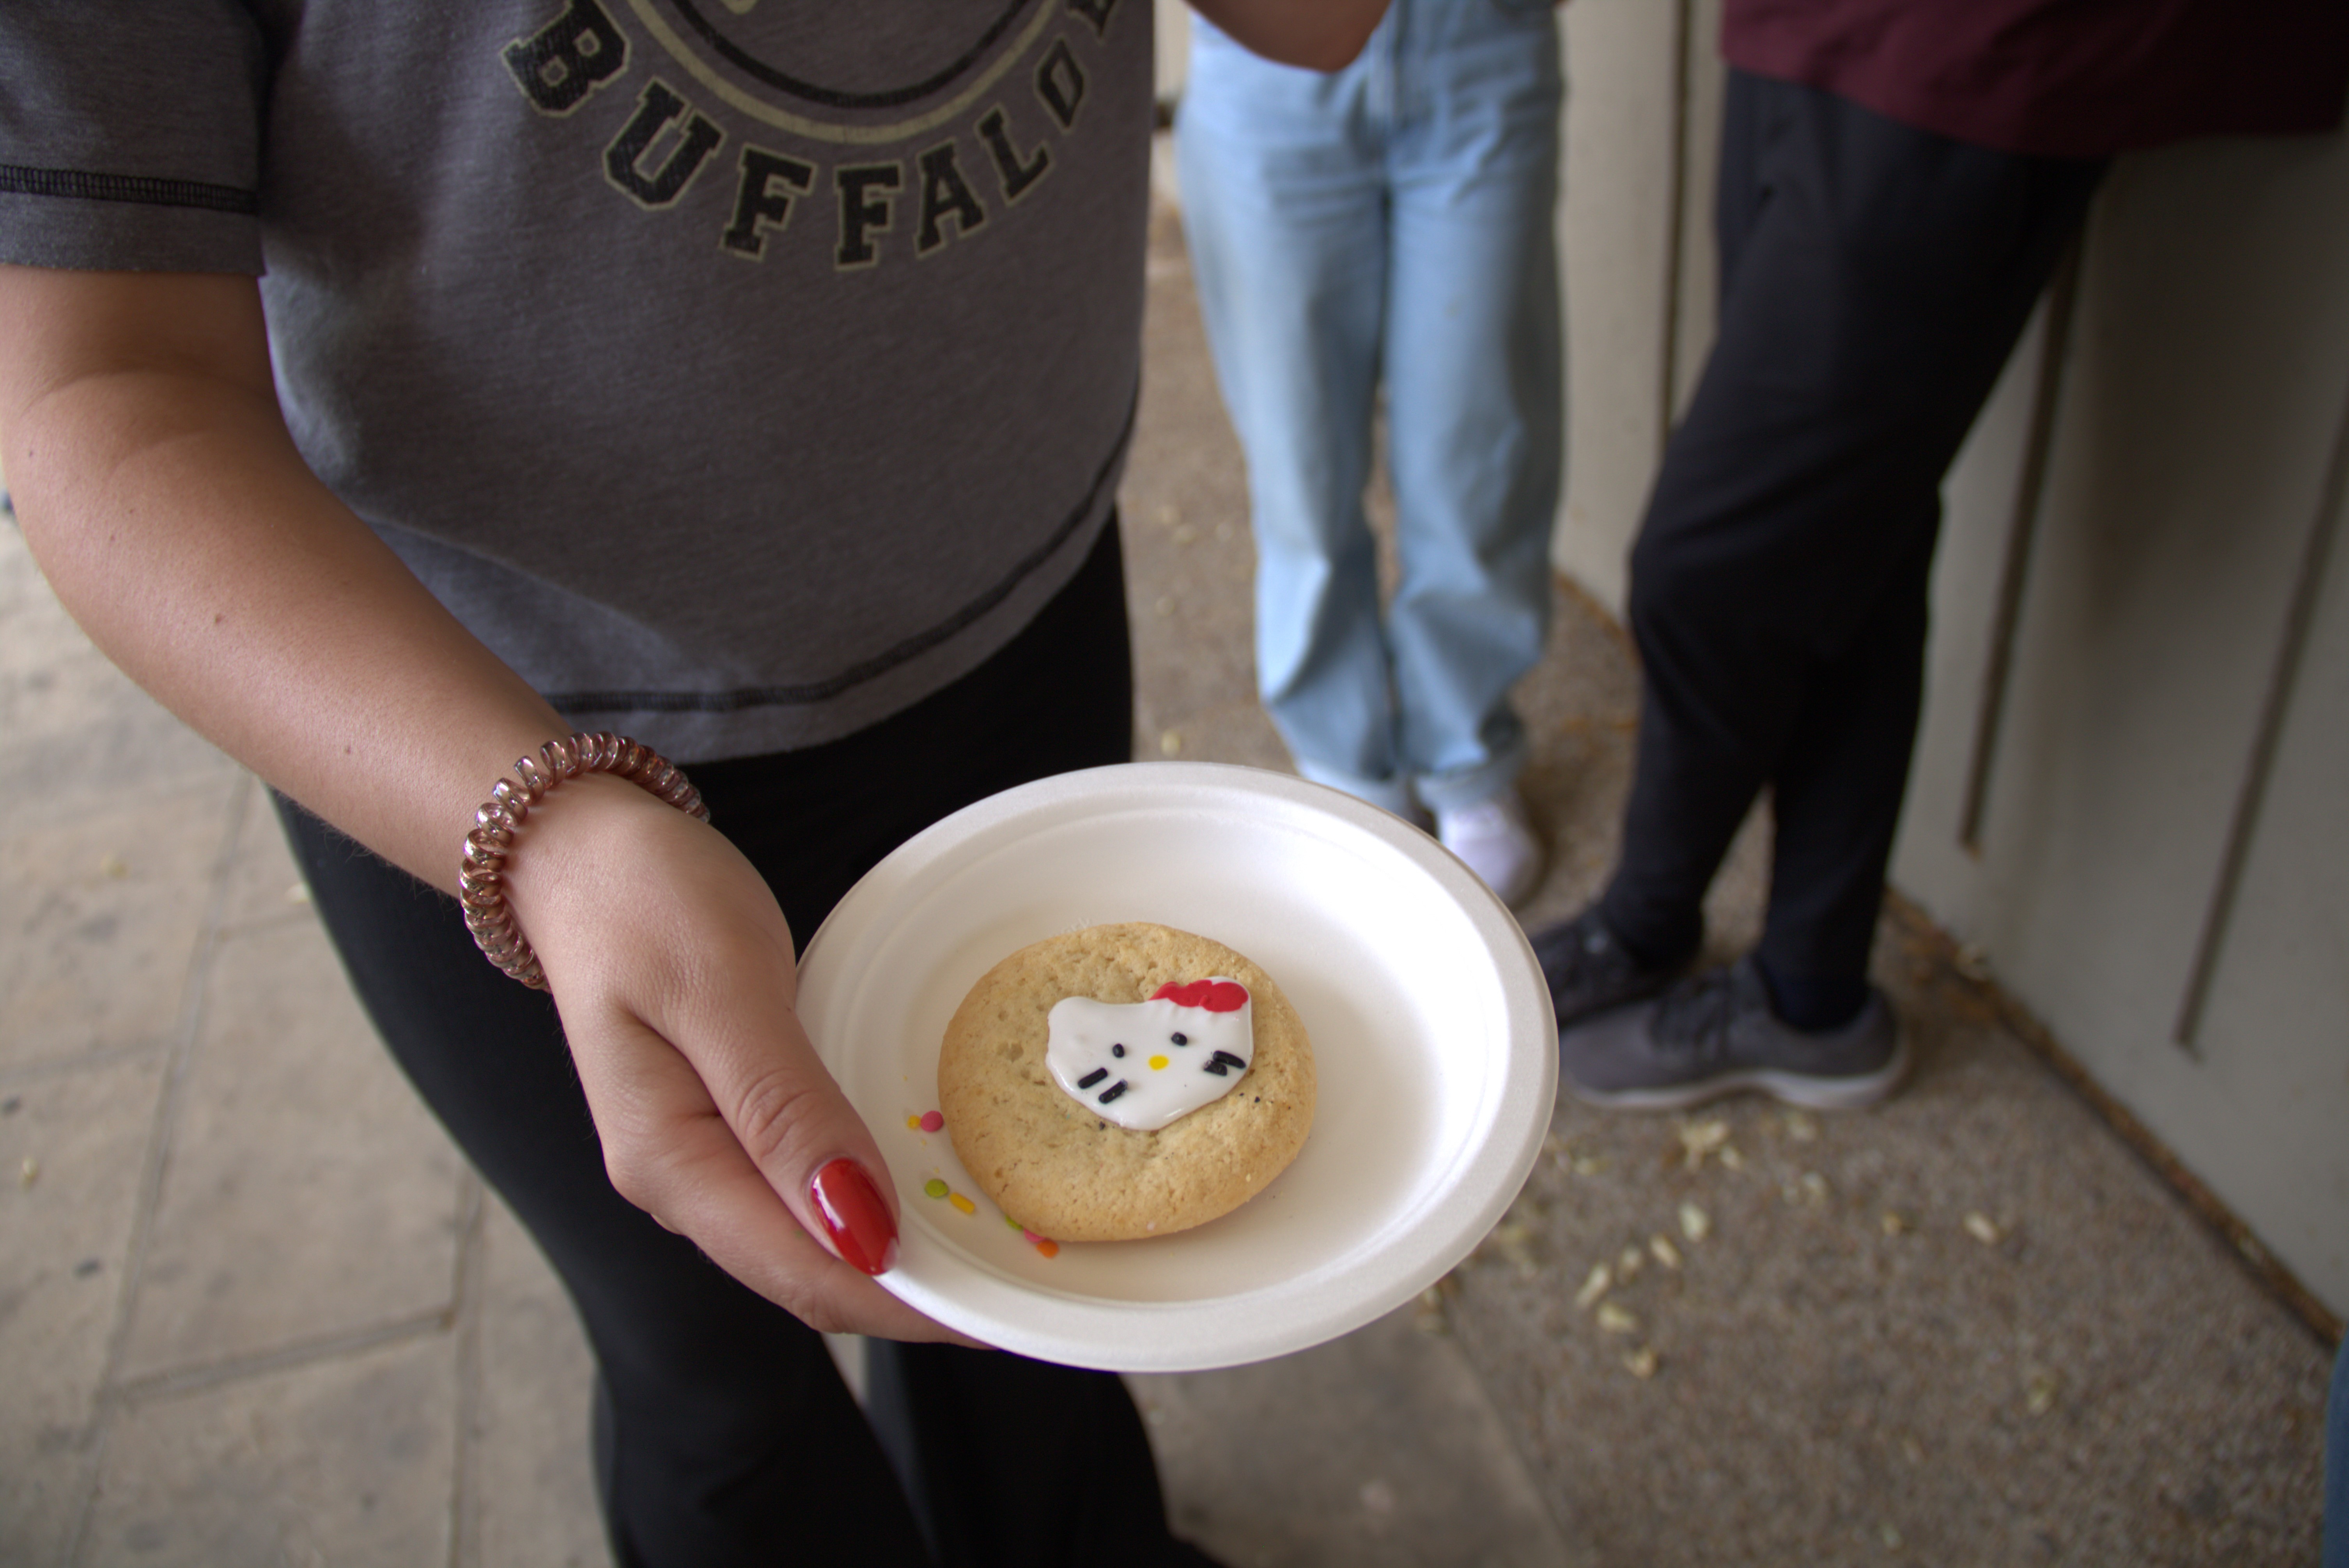 A Hello Kitty cookie was a highlight of the event